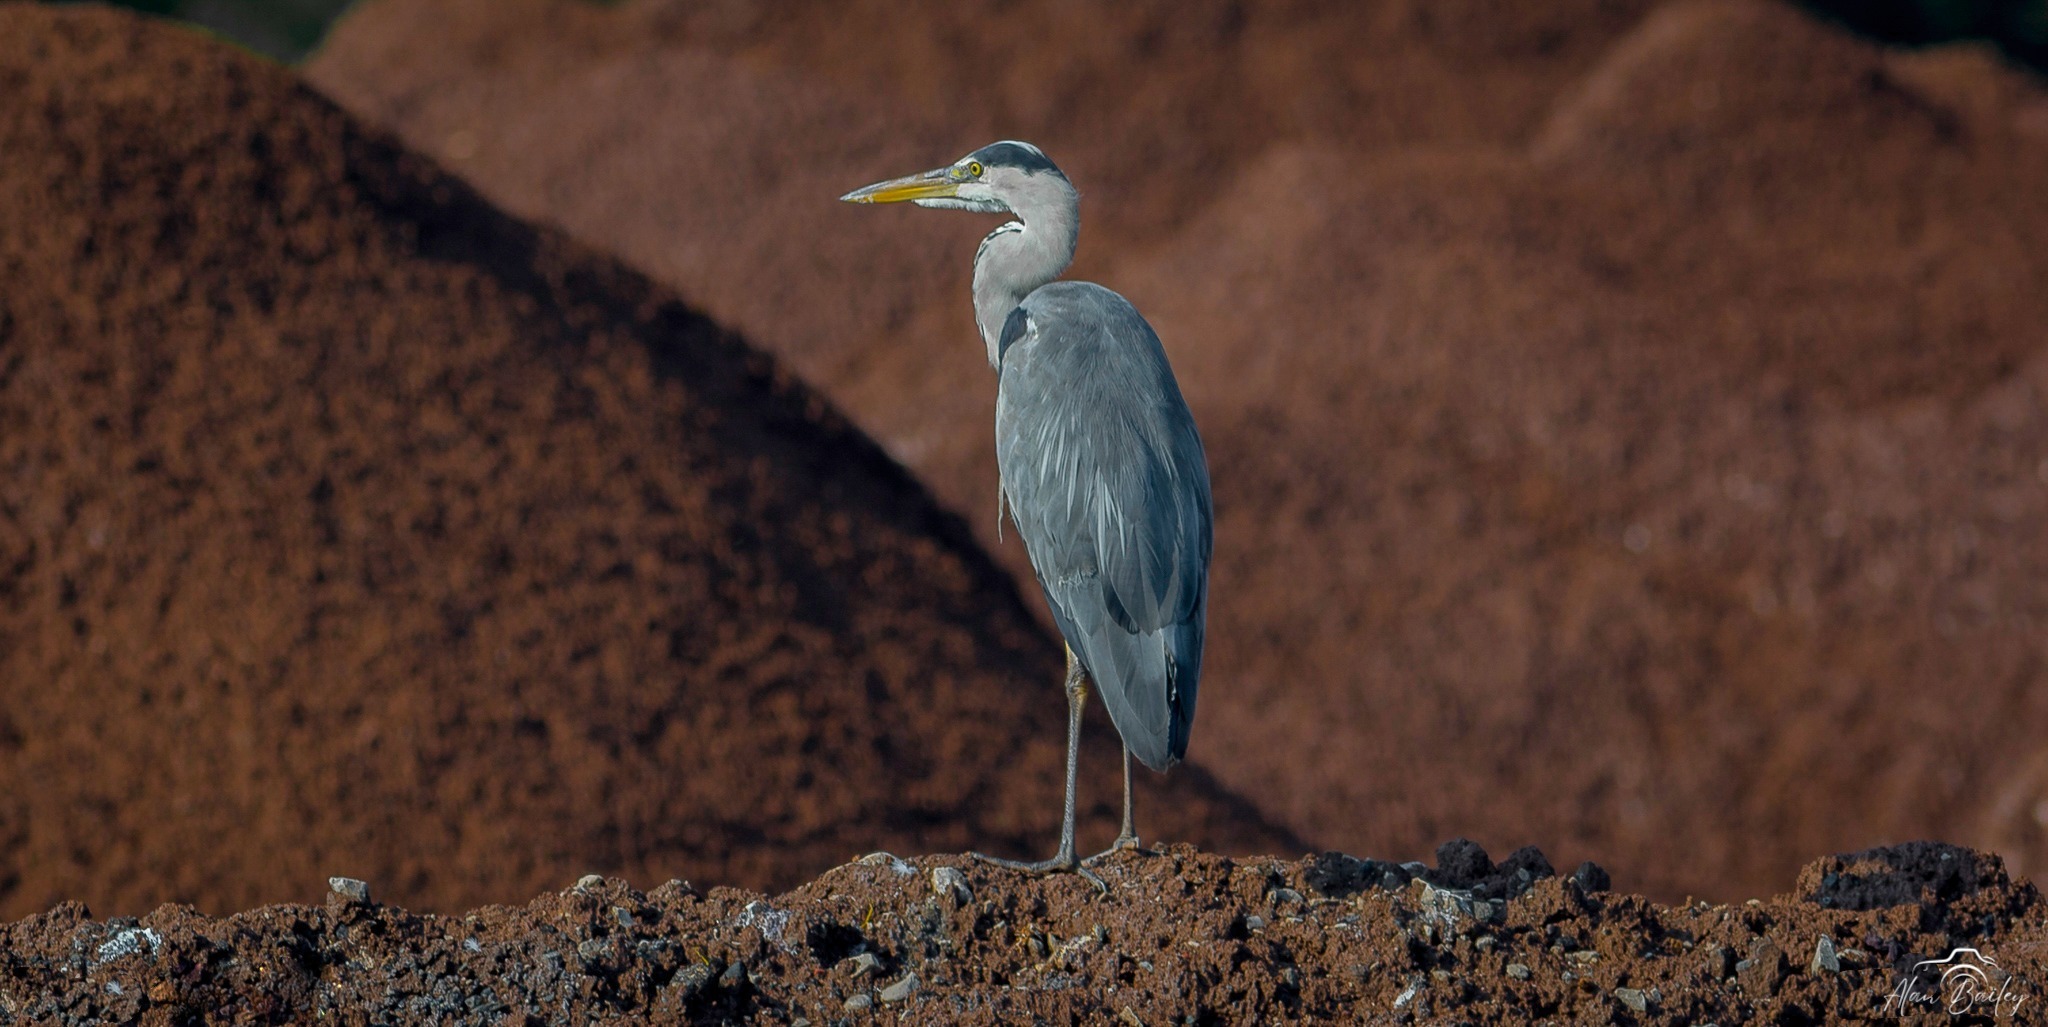 A heron on the salt piles down by the Weaver by Alan Bailey